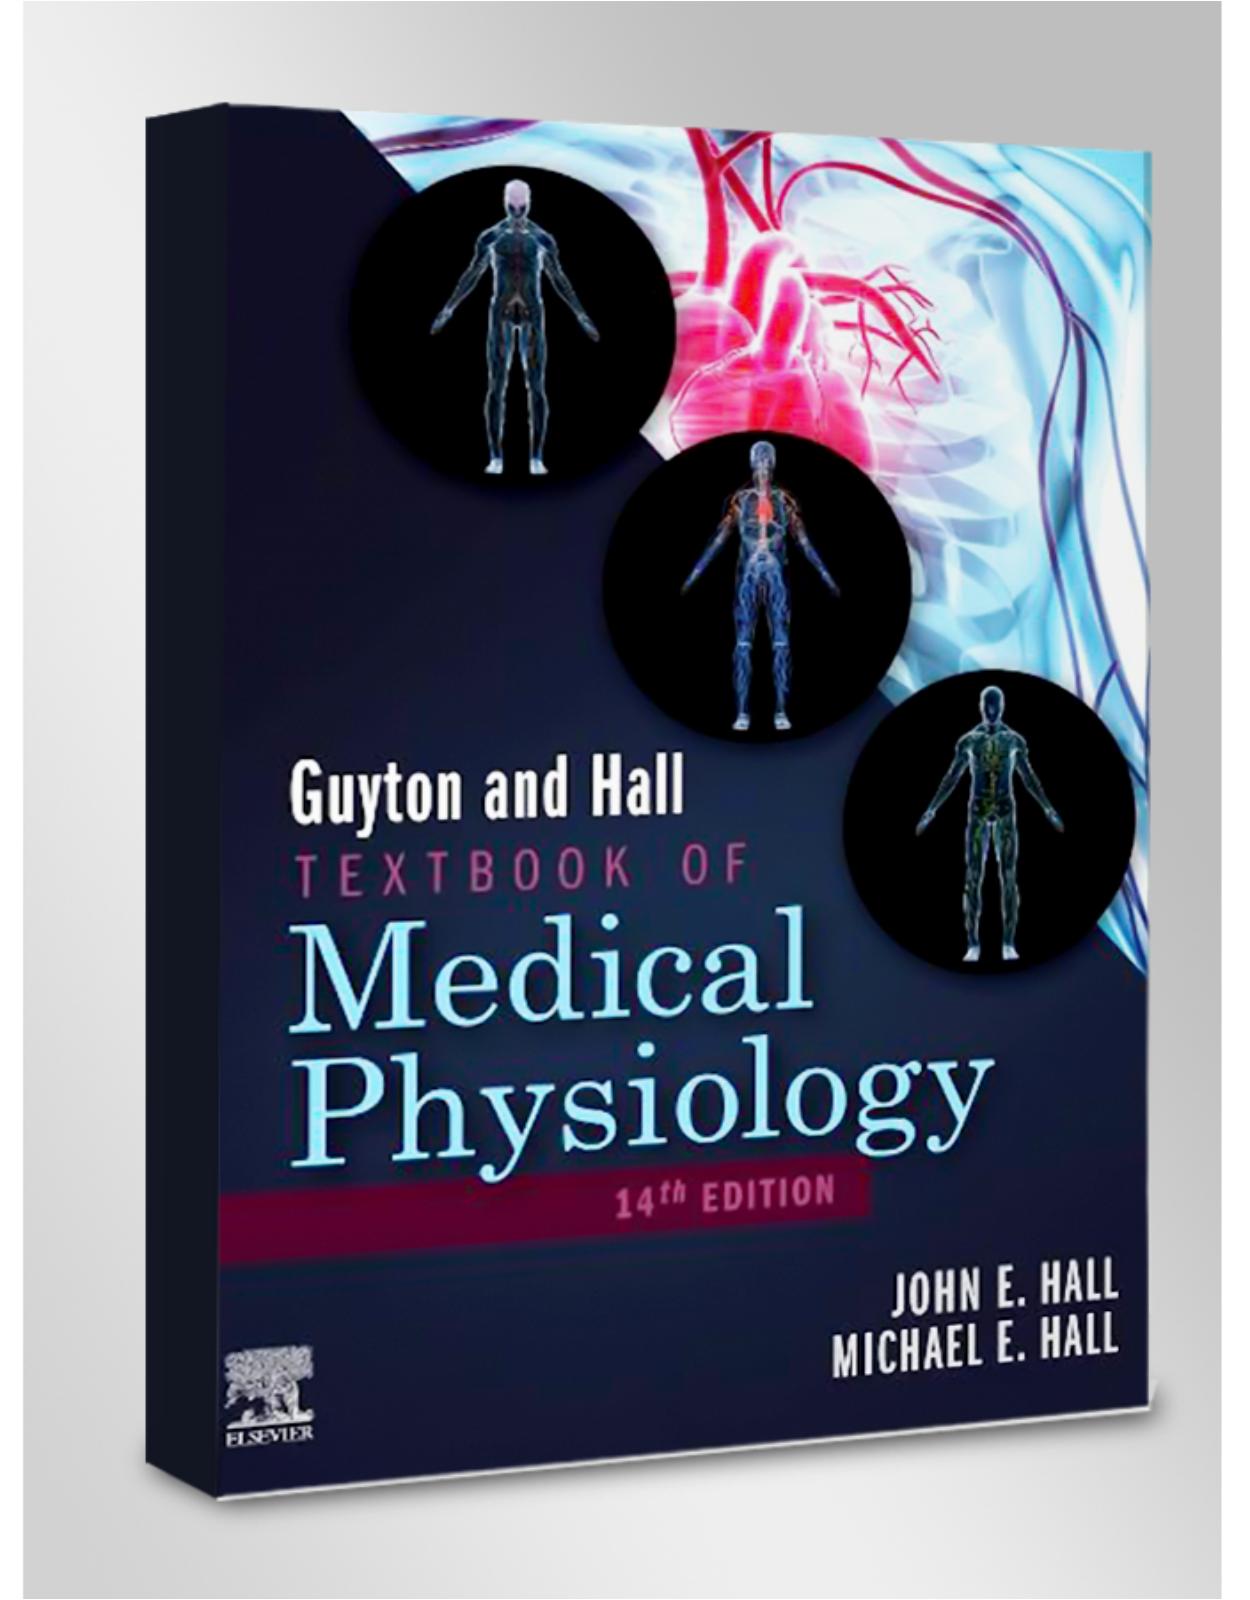 Guyton and Hall Textbook of Medical Physiology, 14e 